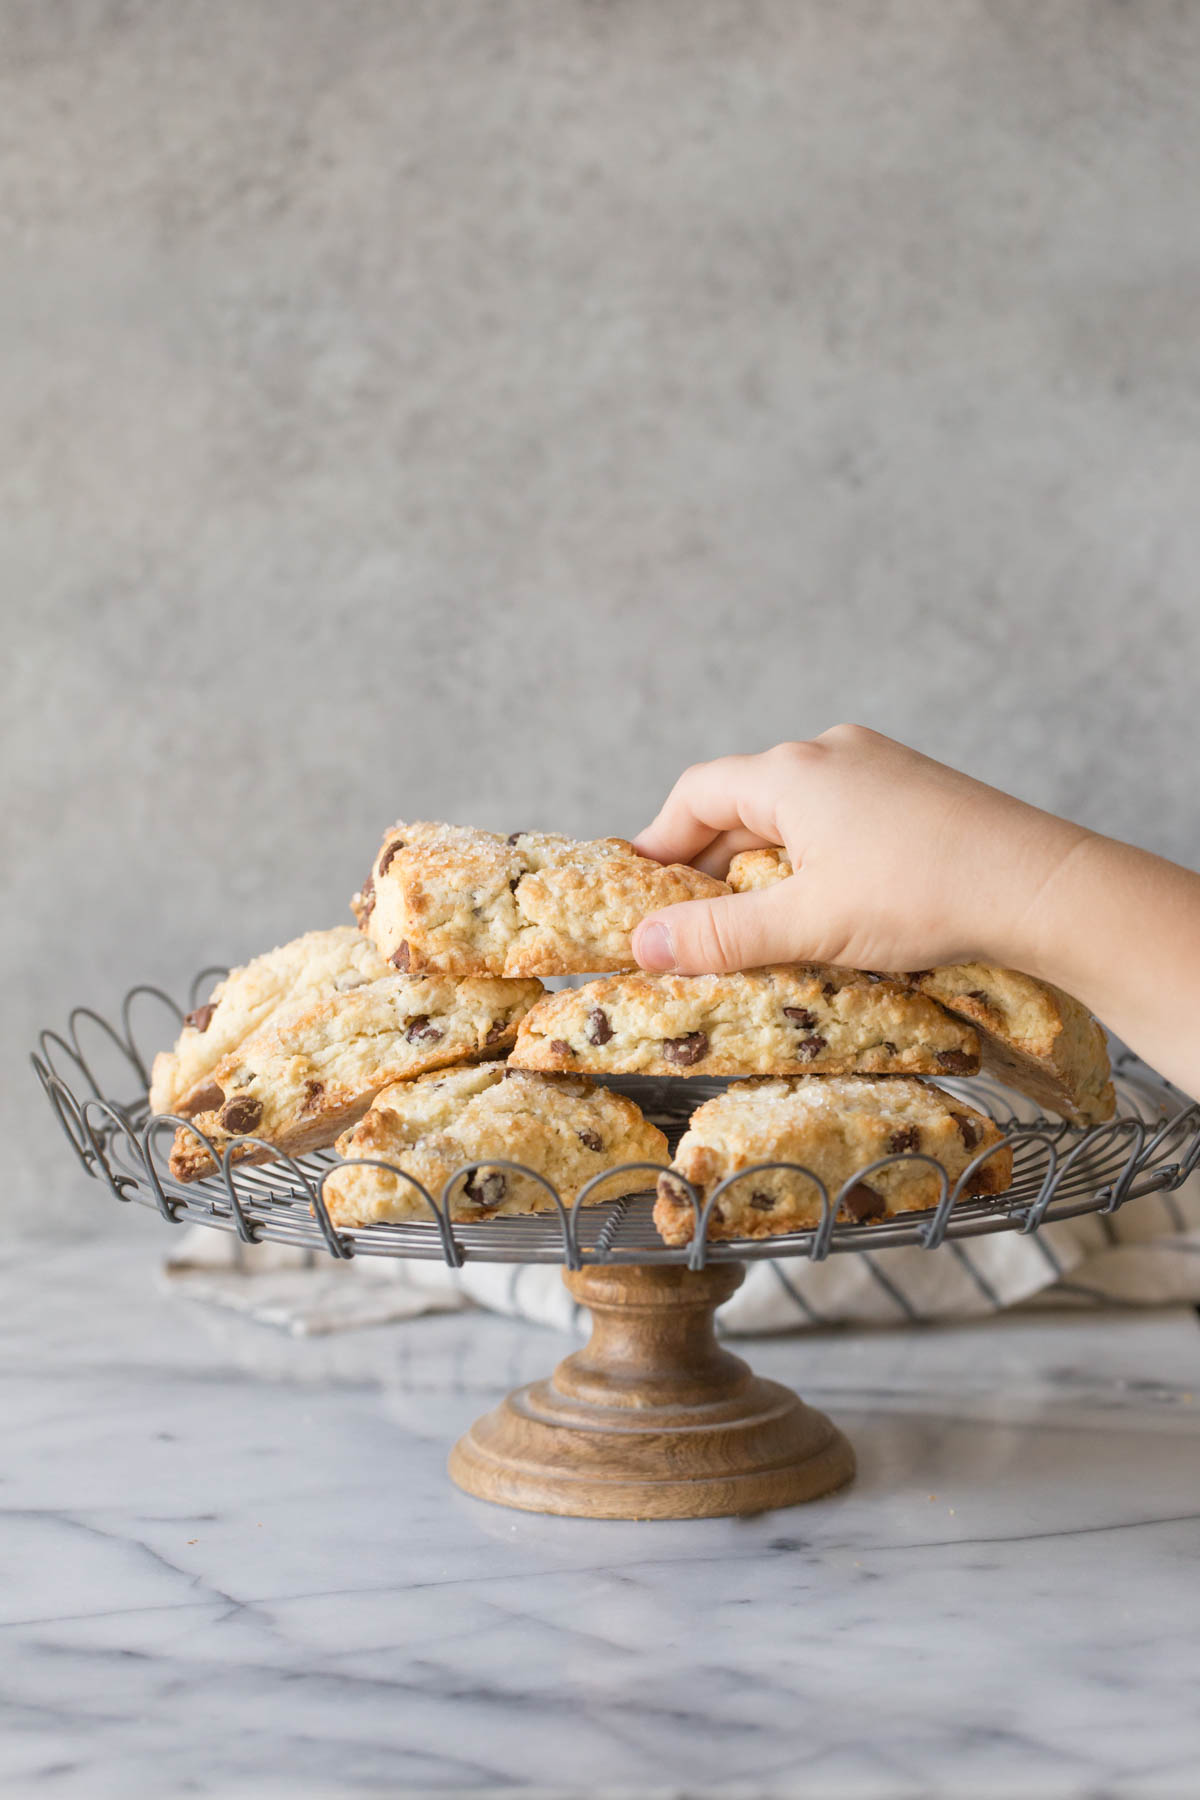 A stack of Chocolate Chip Scones on a cake stand with a hand reaching for the scone on top.  